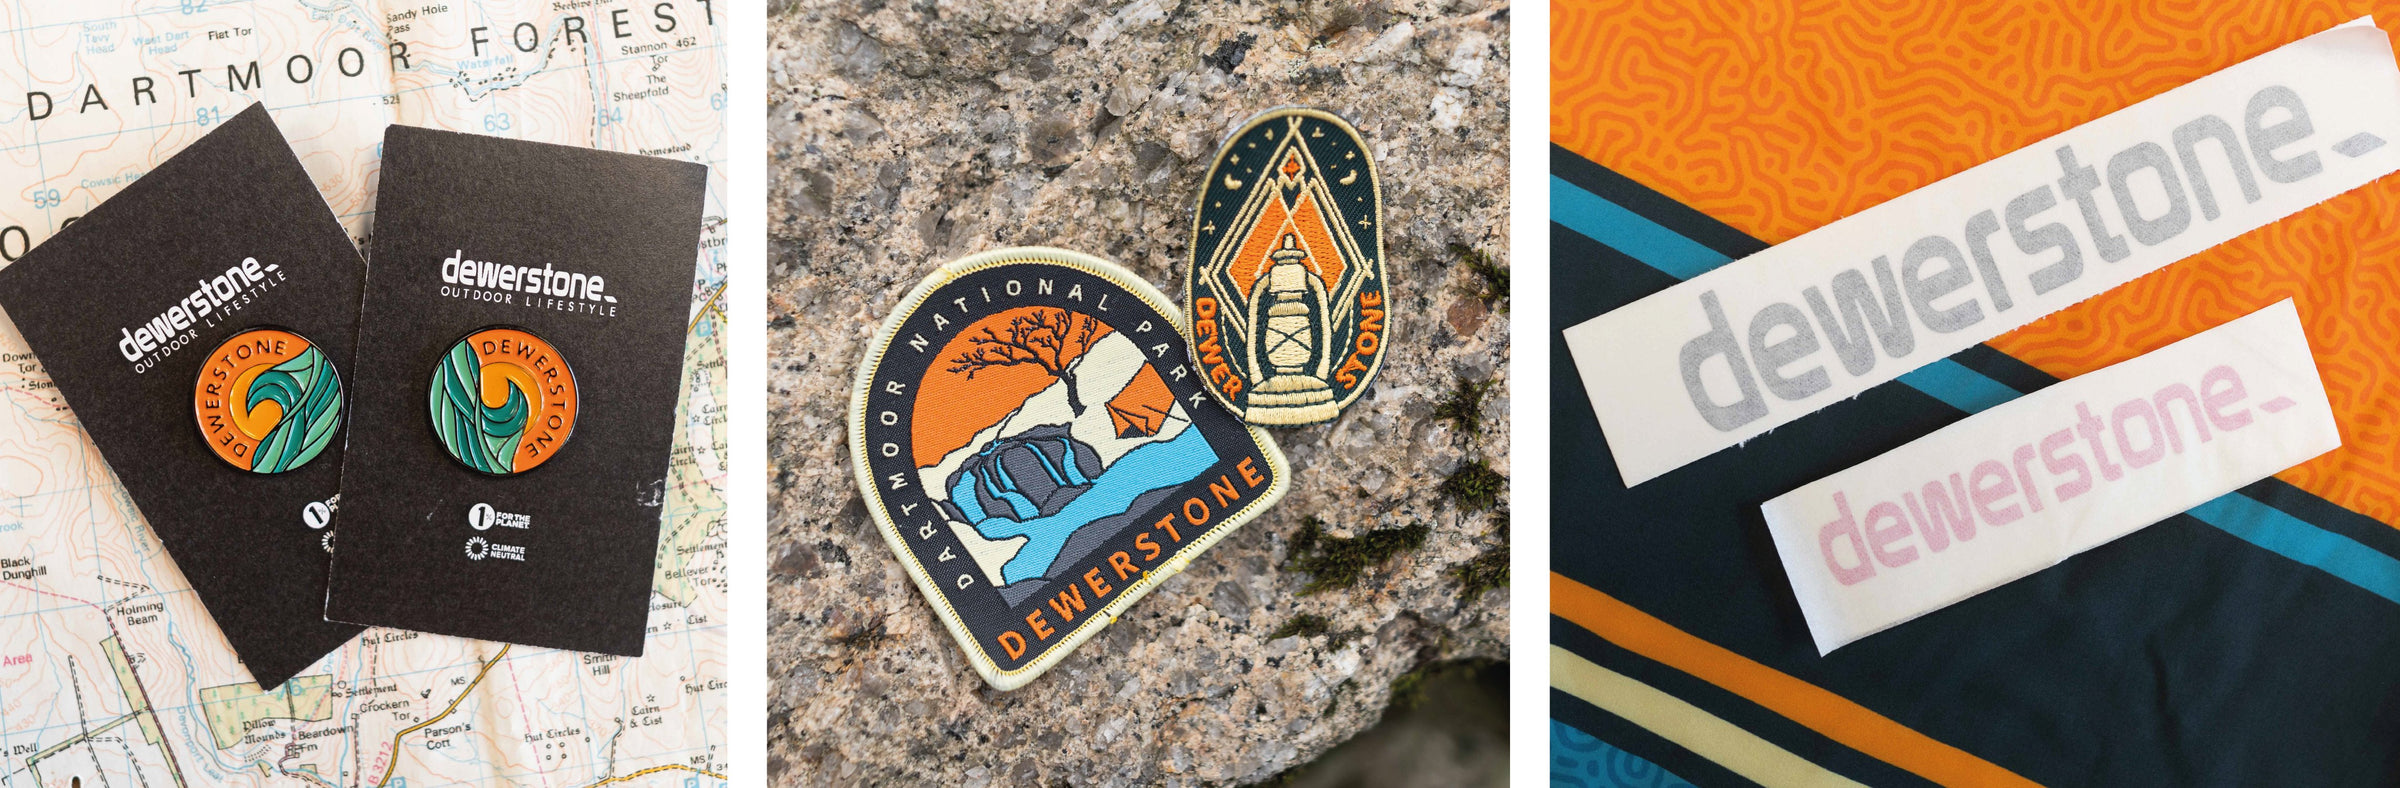 Patches, Pins & Stickers - Find the ultimate gift for the outdoors enthusiast